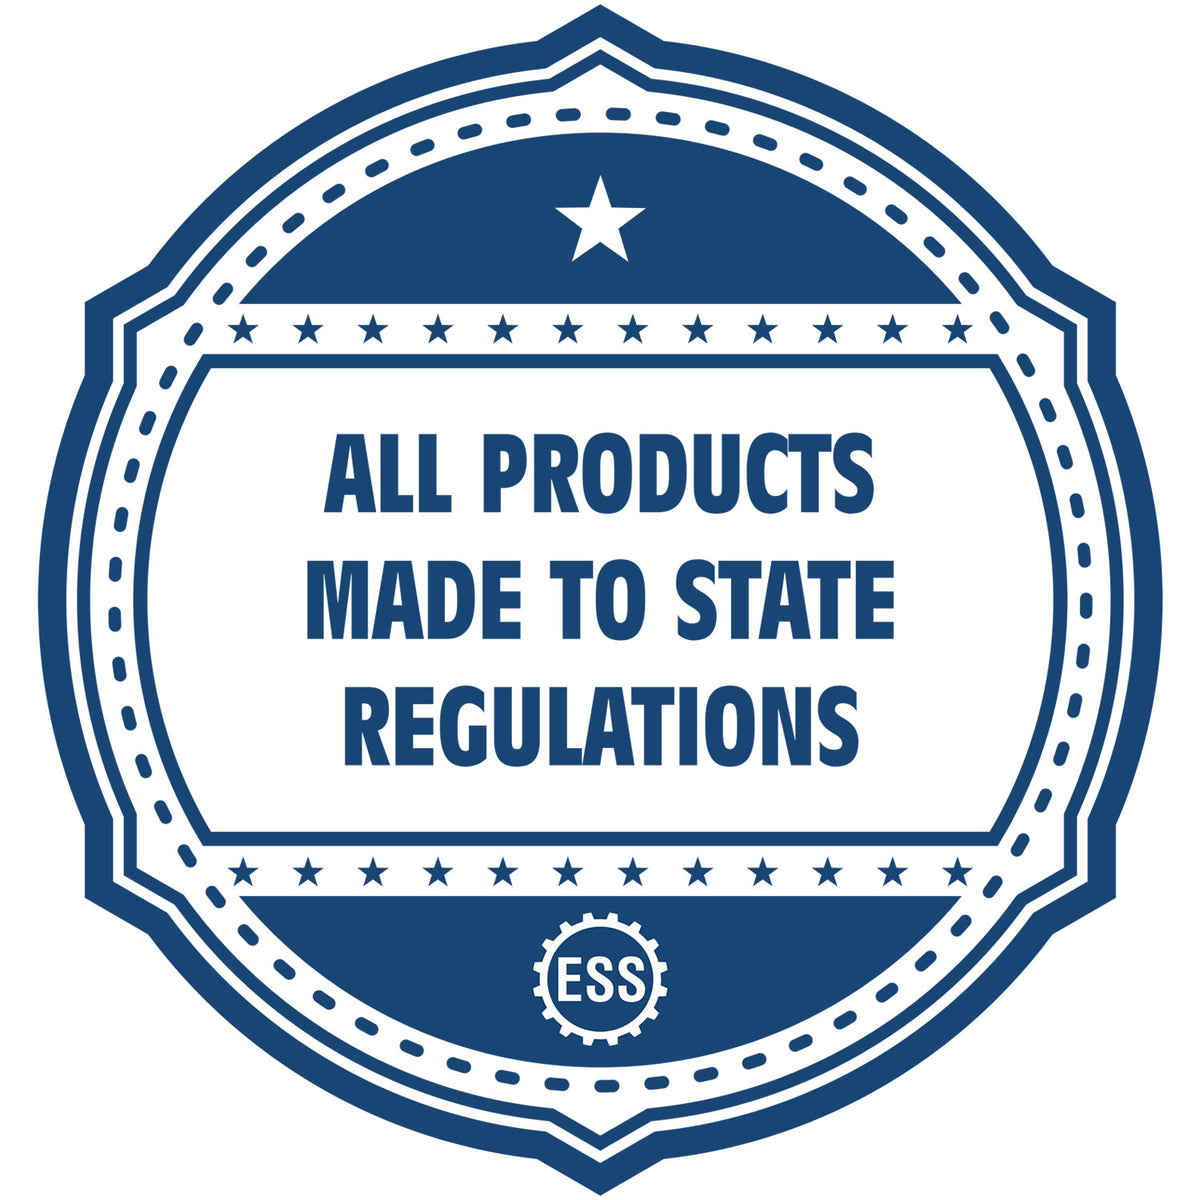 An icon or badge element for the Washington Landscape Architectural Seal Stamp showing that this product is made in compliance with state regulations.